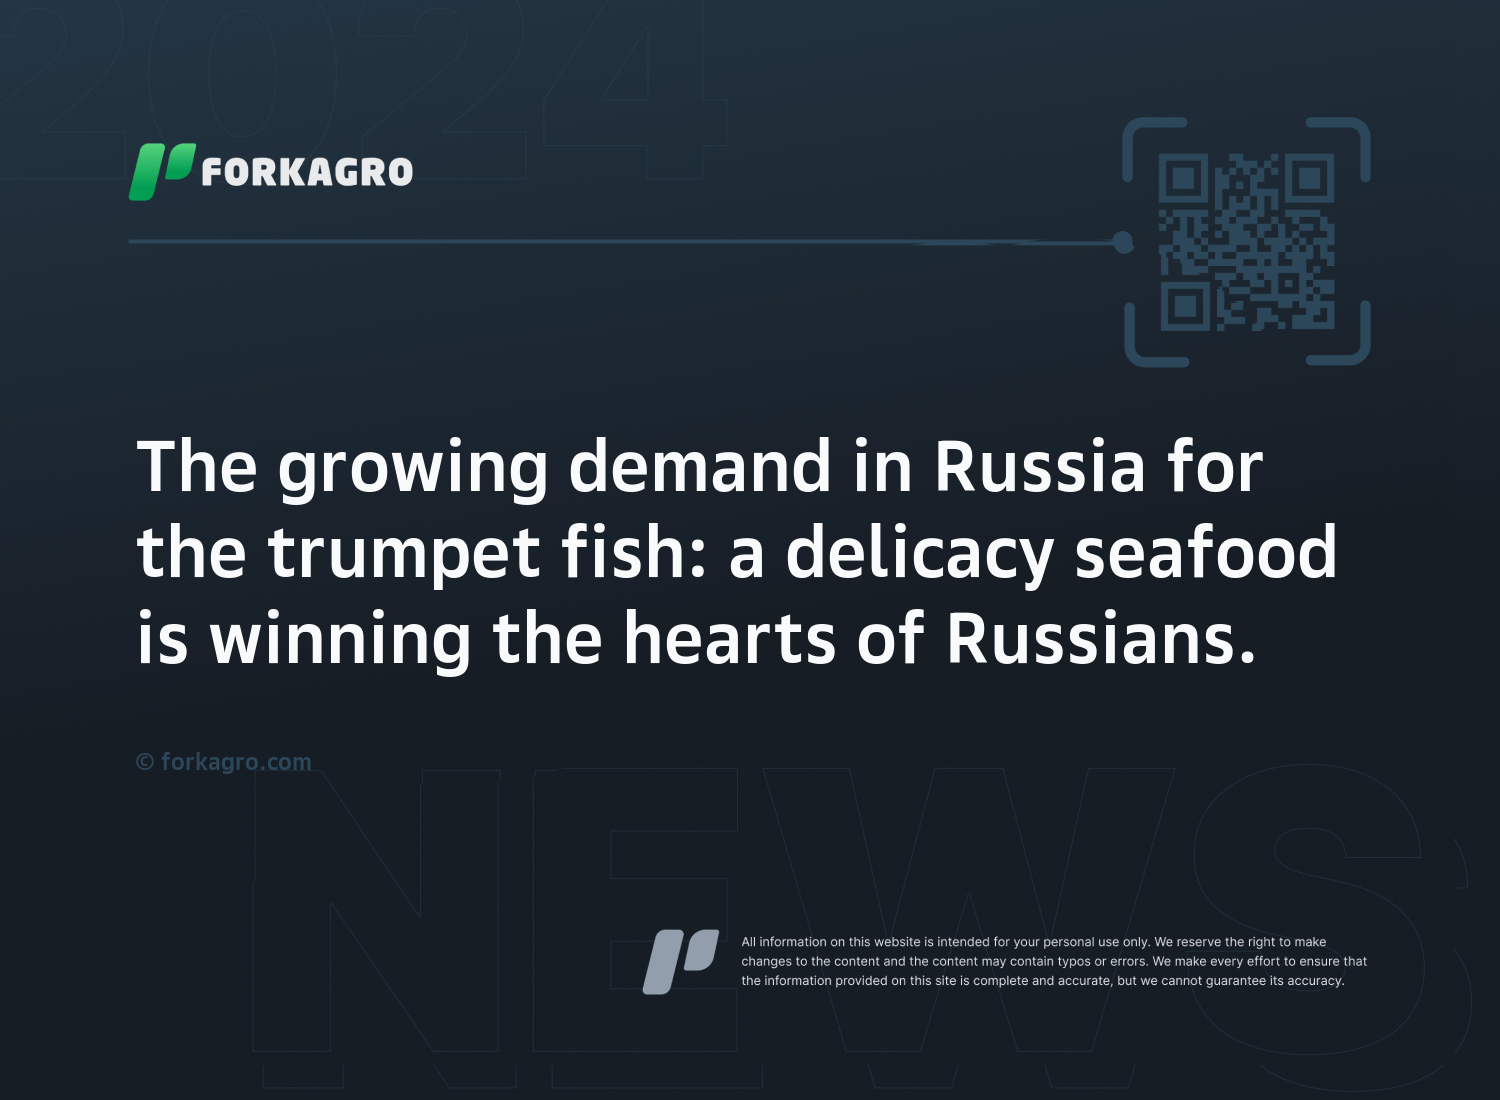 The growing demand in Russia for the trumpet fish: a delicacy seafood is winning the hearts of Russians.